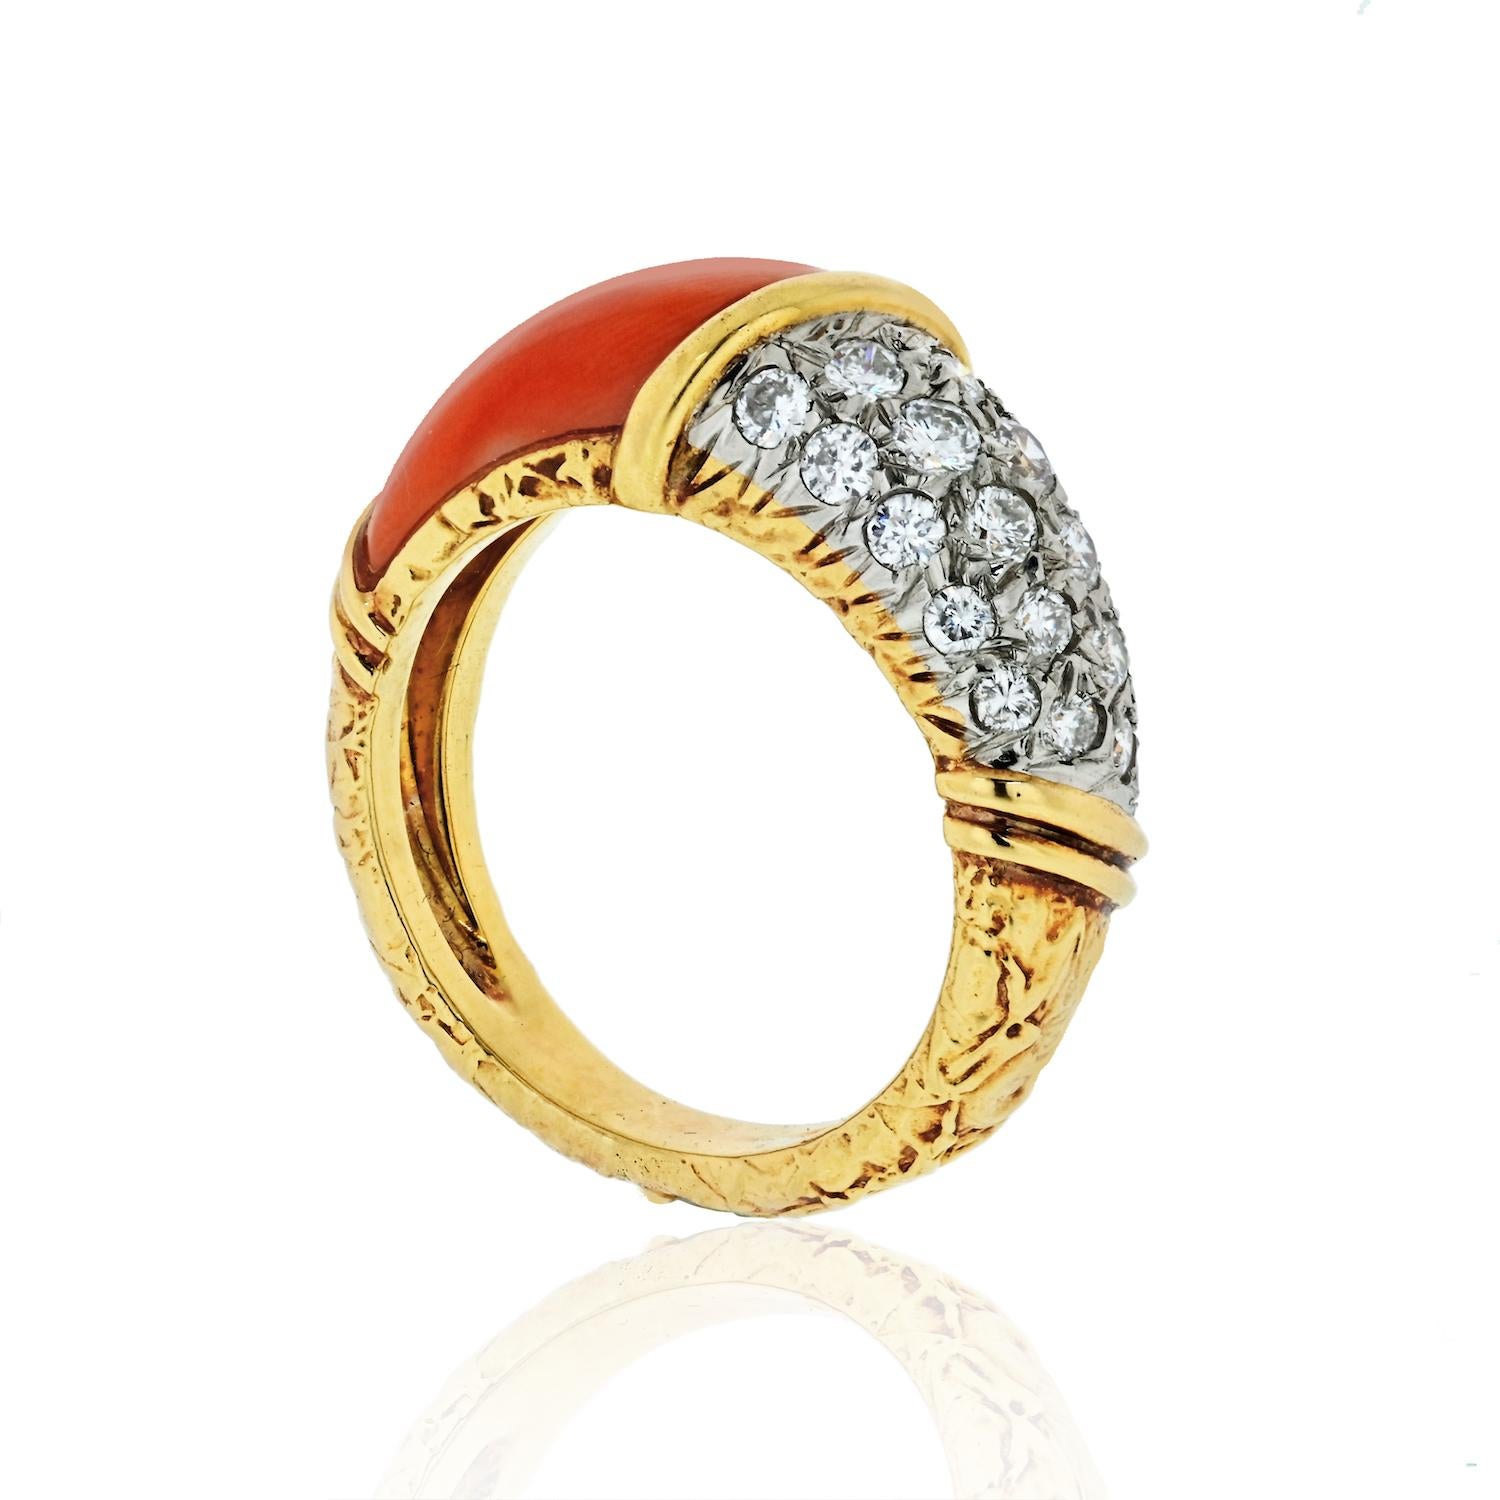 Van Cleef And Arpels Circa 1960 Coral And Diamond Band Ring.
Coral
20 Diamonds
Size: 5.25
Size: 5.25
